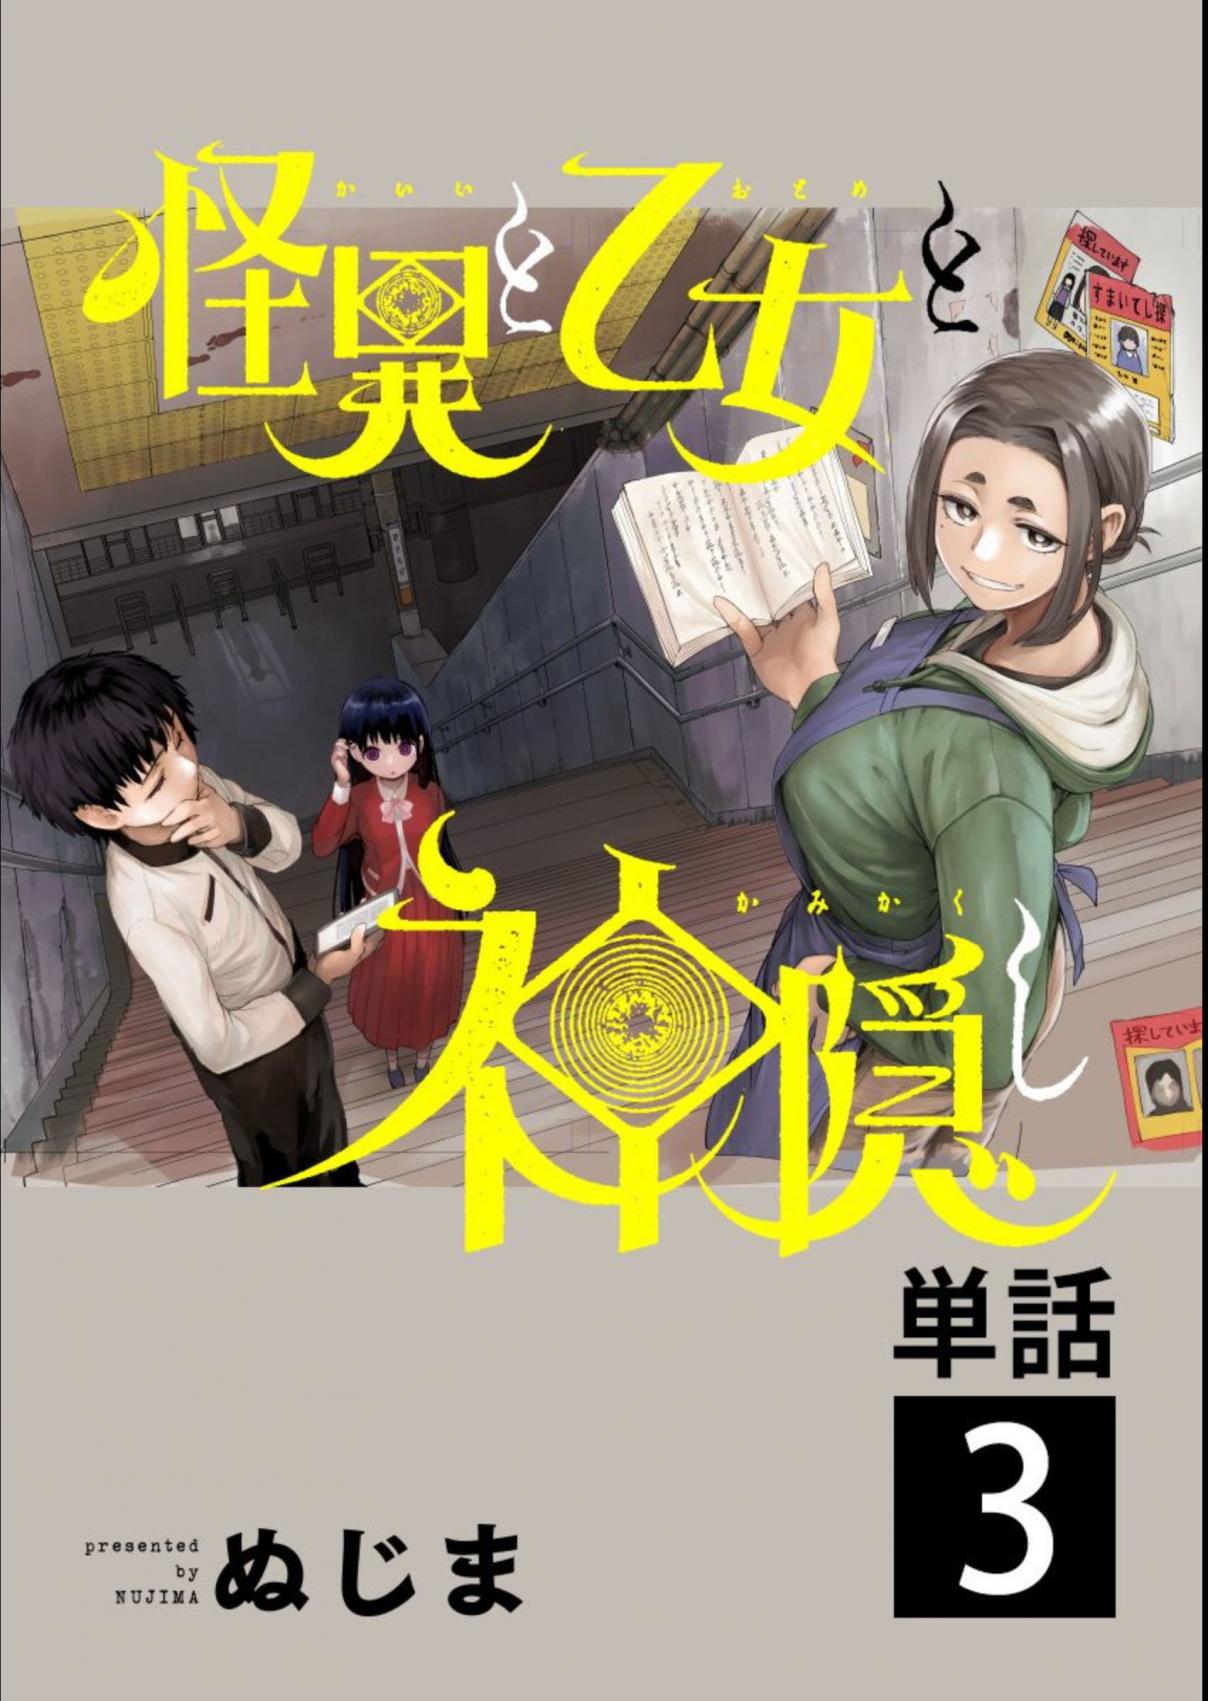 Mysteries, Maidens, And Mysterious Disappearances Vol. 1 Ch. 3 Tsukiyomi's Water of Life Part 3